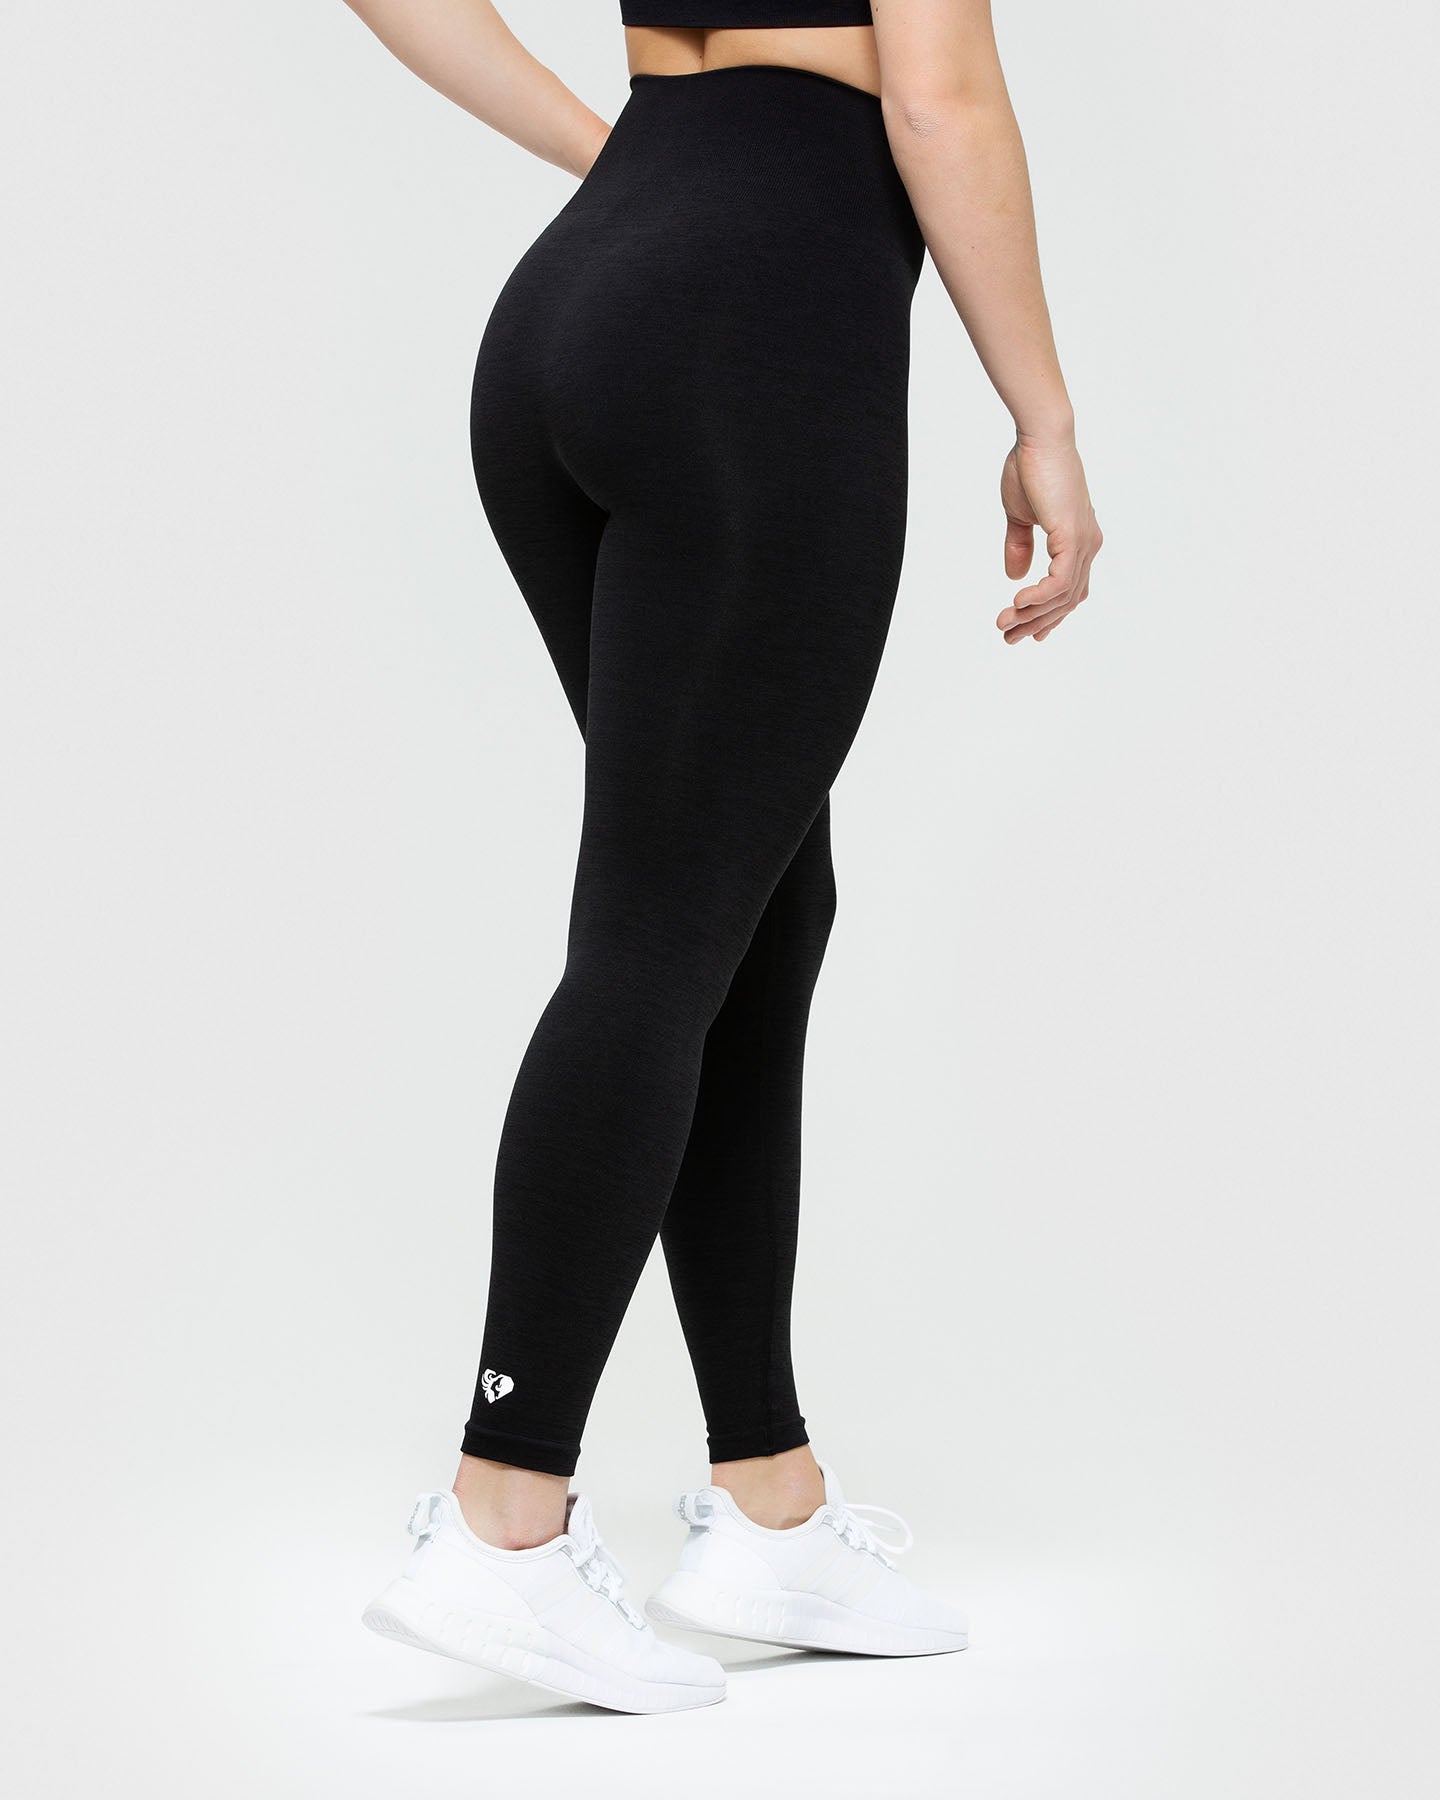  HXSZWJJ Fitness Leggings Black White Stitching Printing Leggings  Summer Polyester Breathable Leggings (Color : White, Size : Large) :  Clothing, Shoes & Jewelry